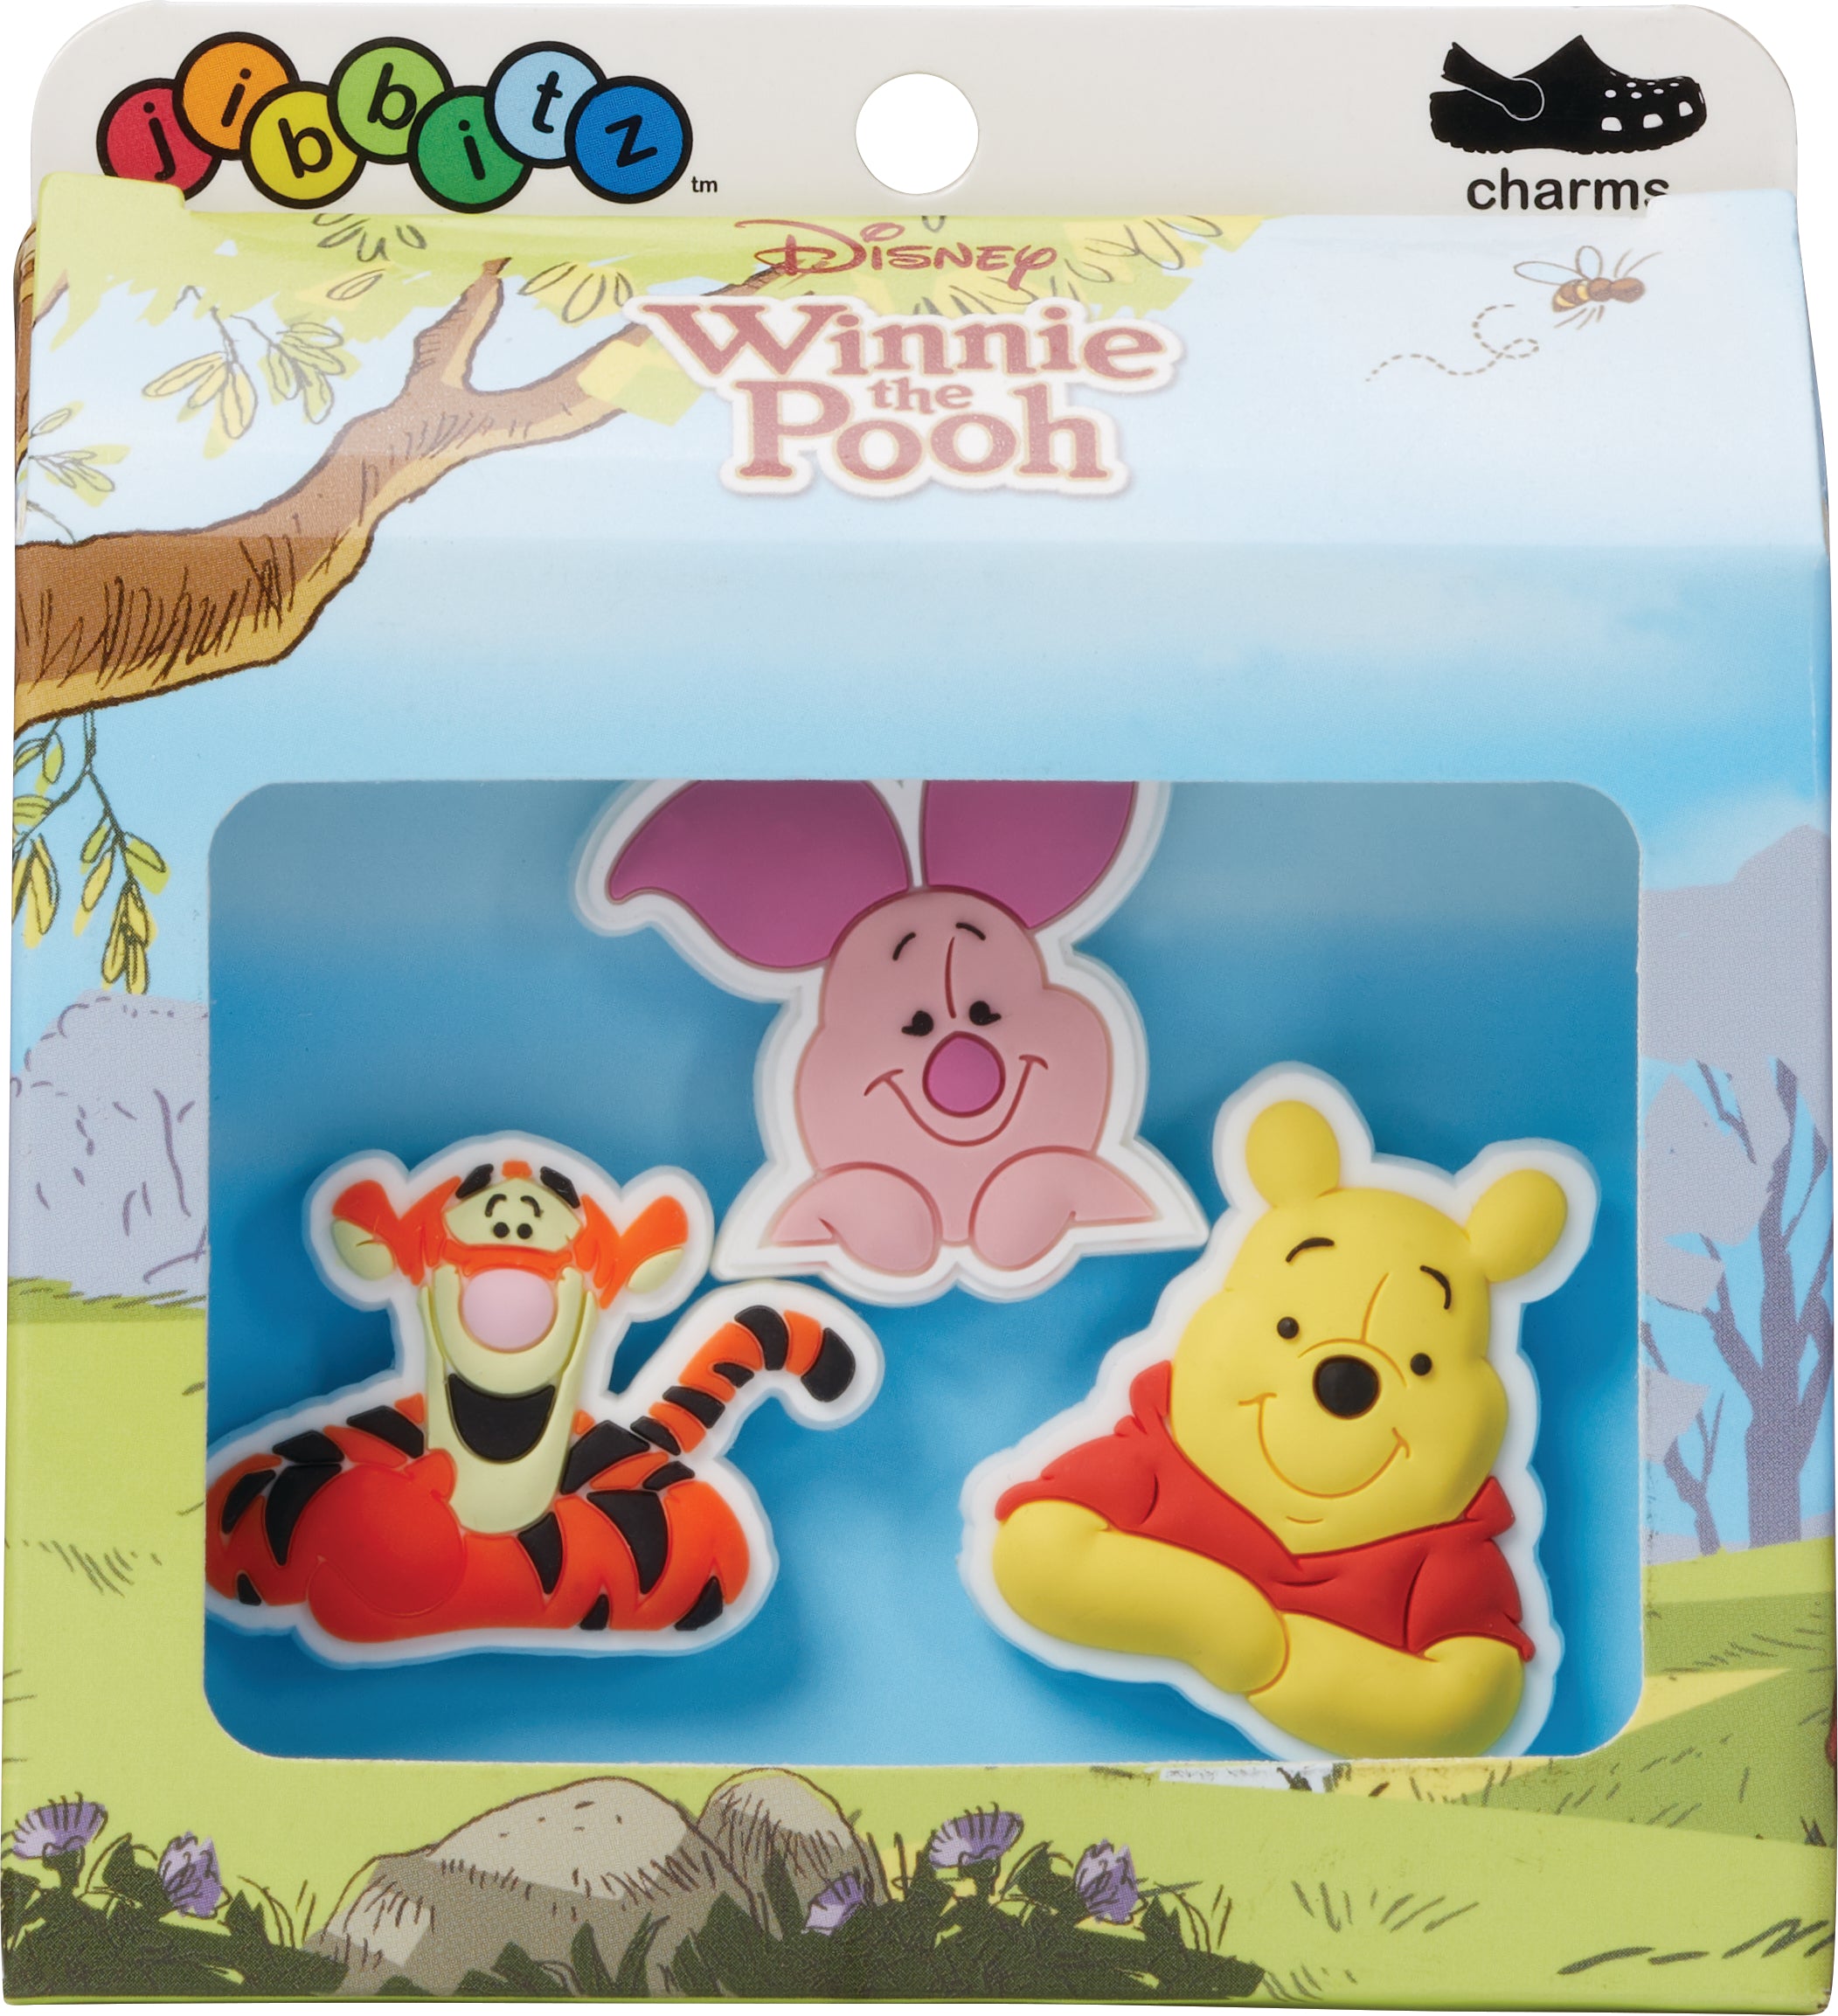 Winnie the Pooh SS17 3-pack